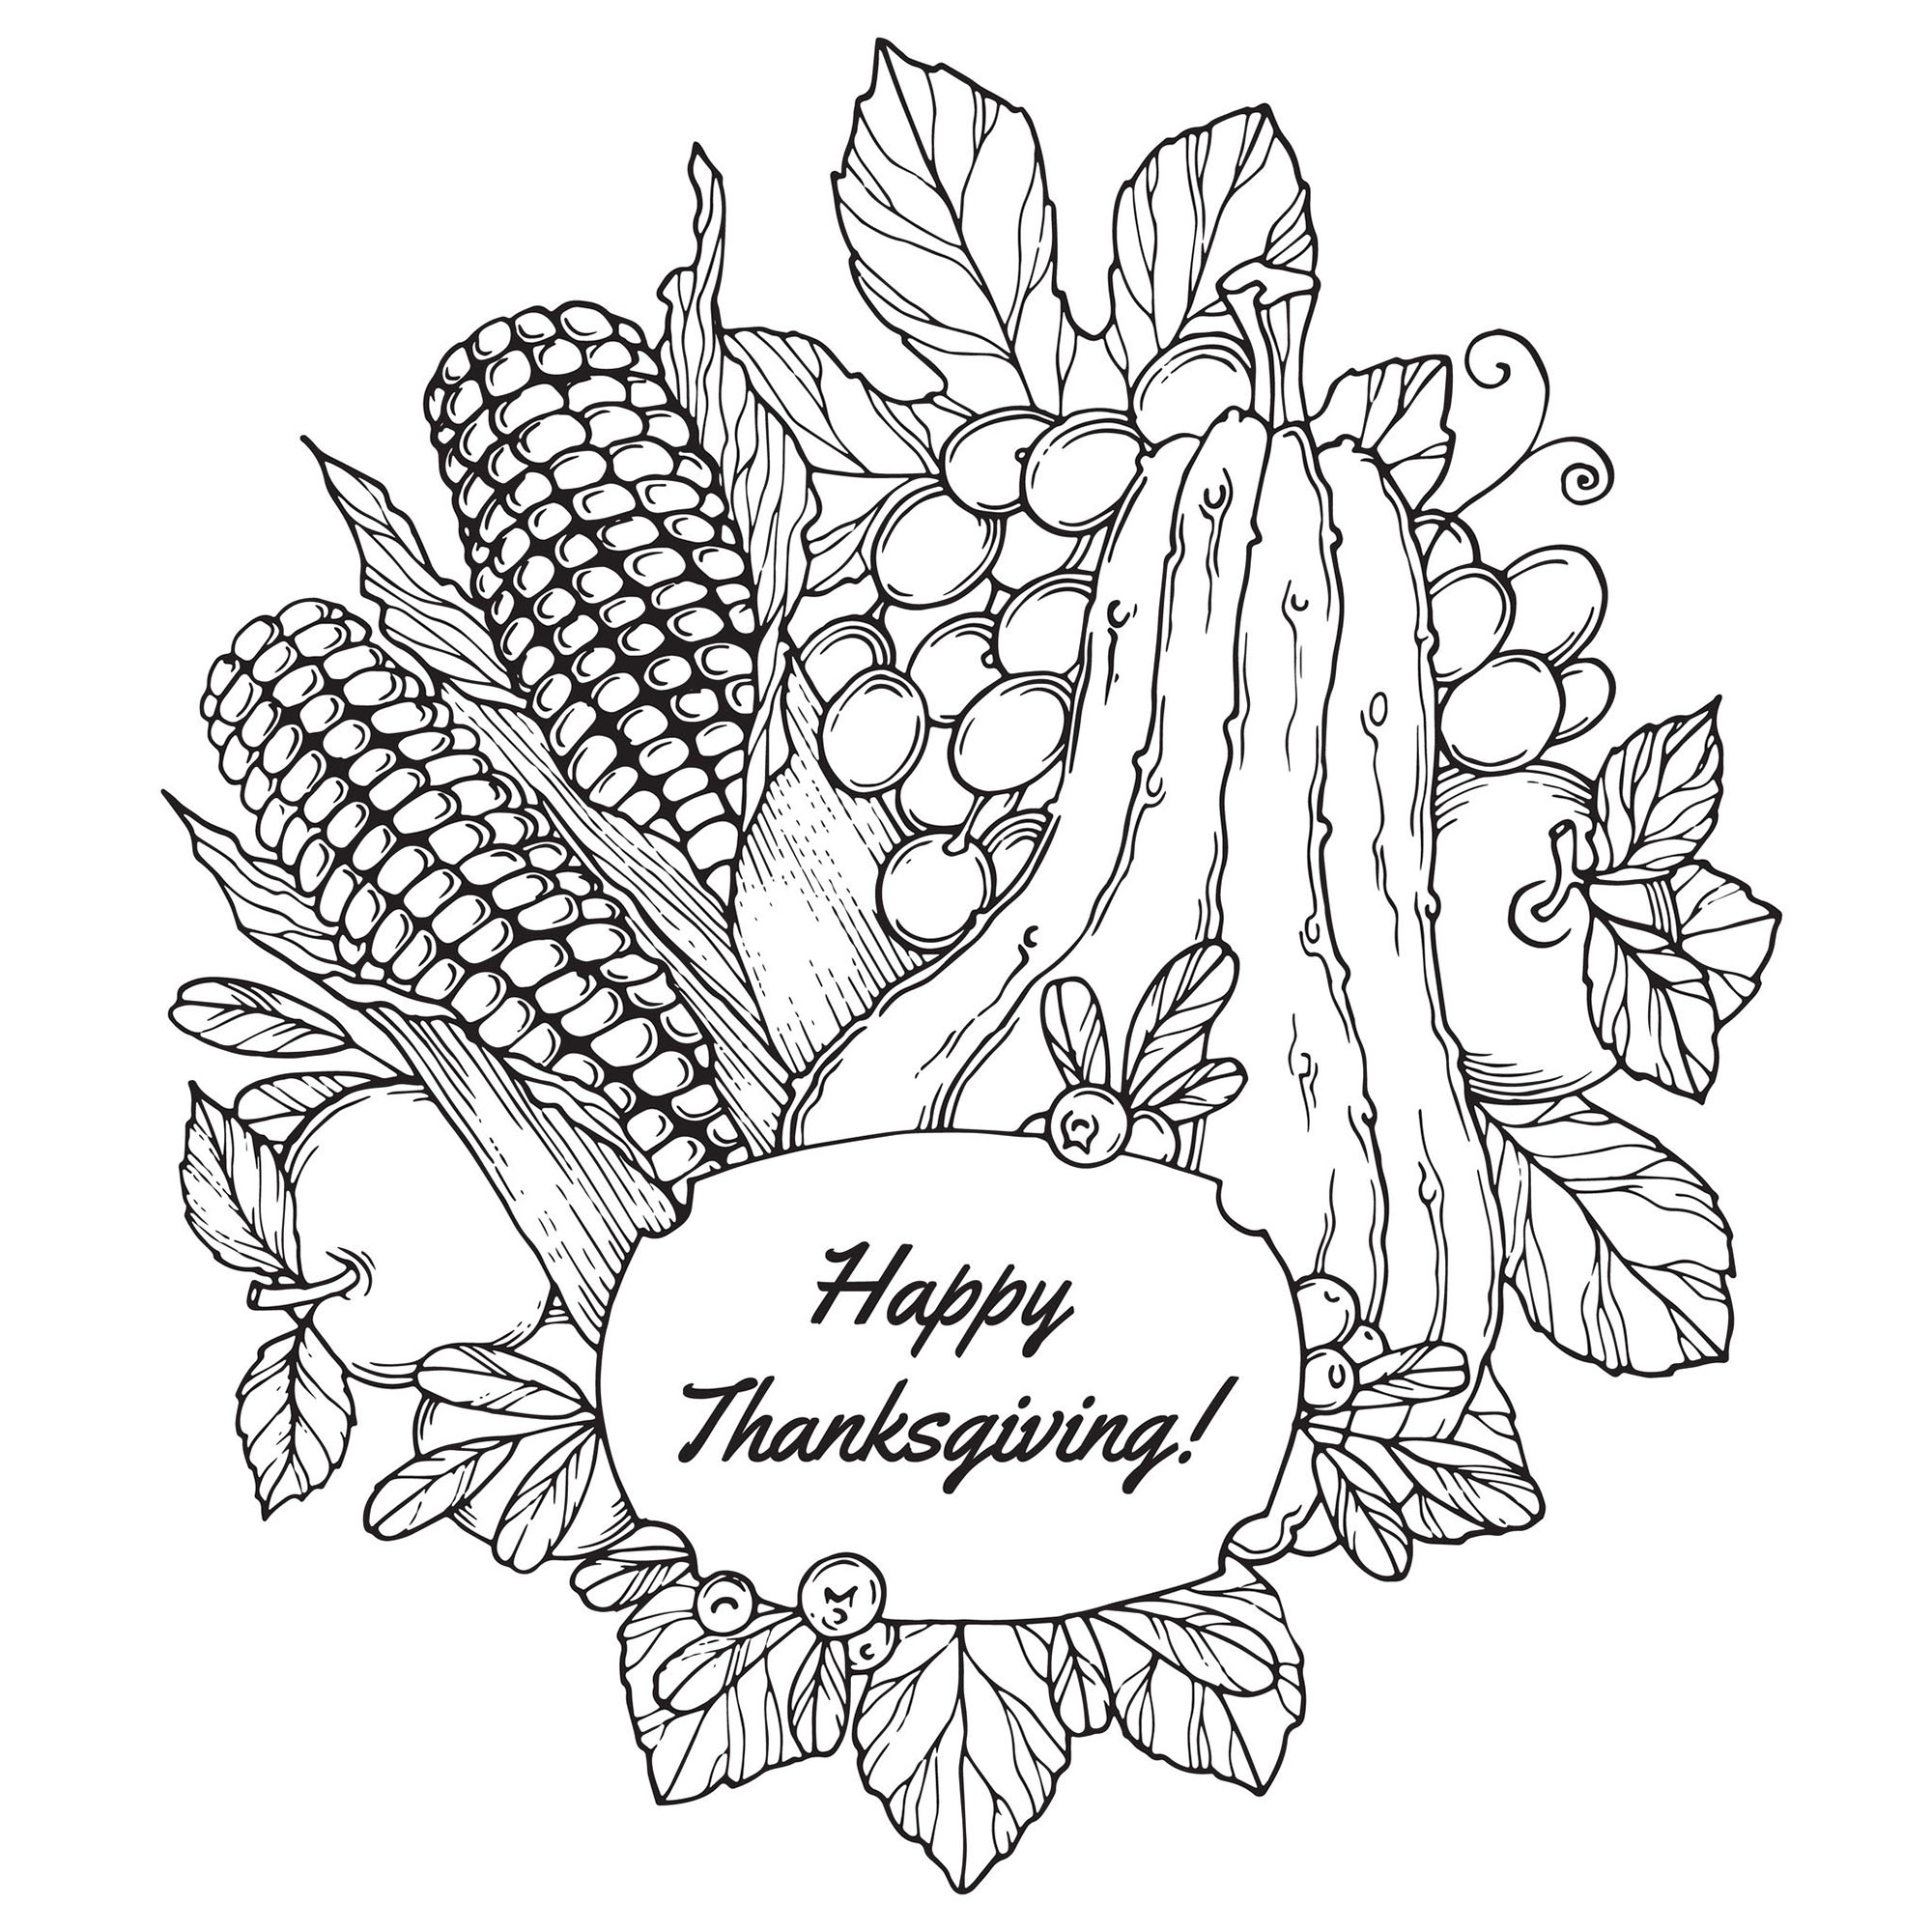 328 Animal Thanksgiving Coloring Pages Free for Kindergarten